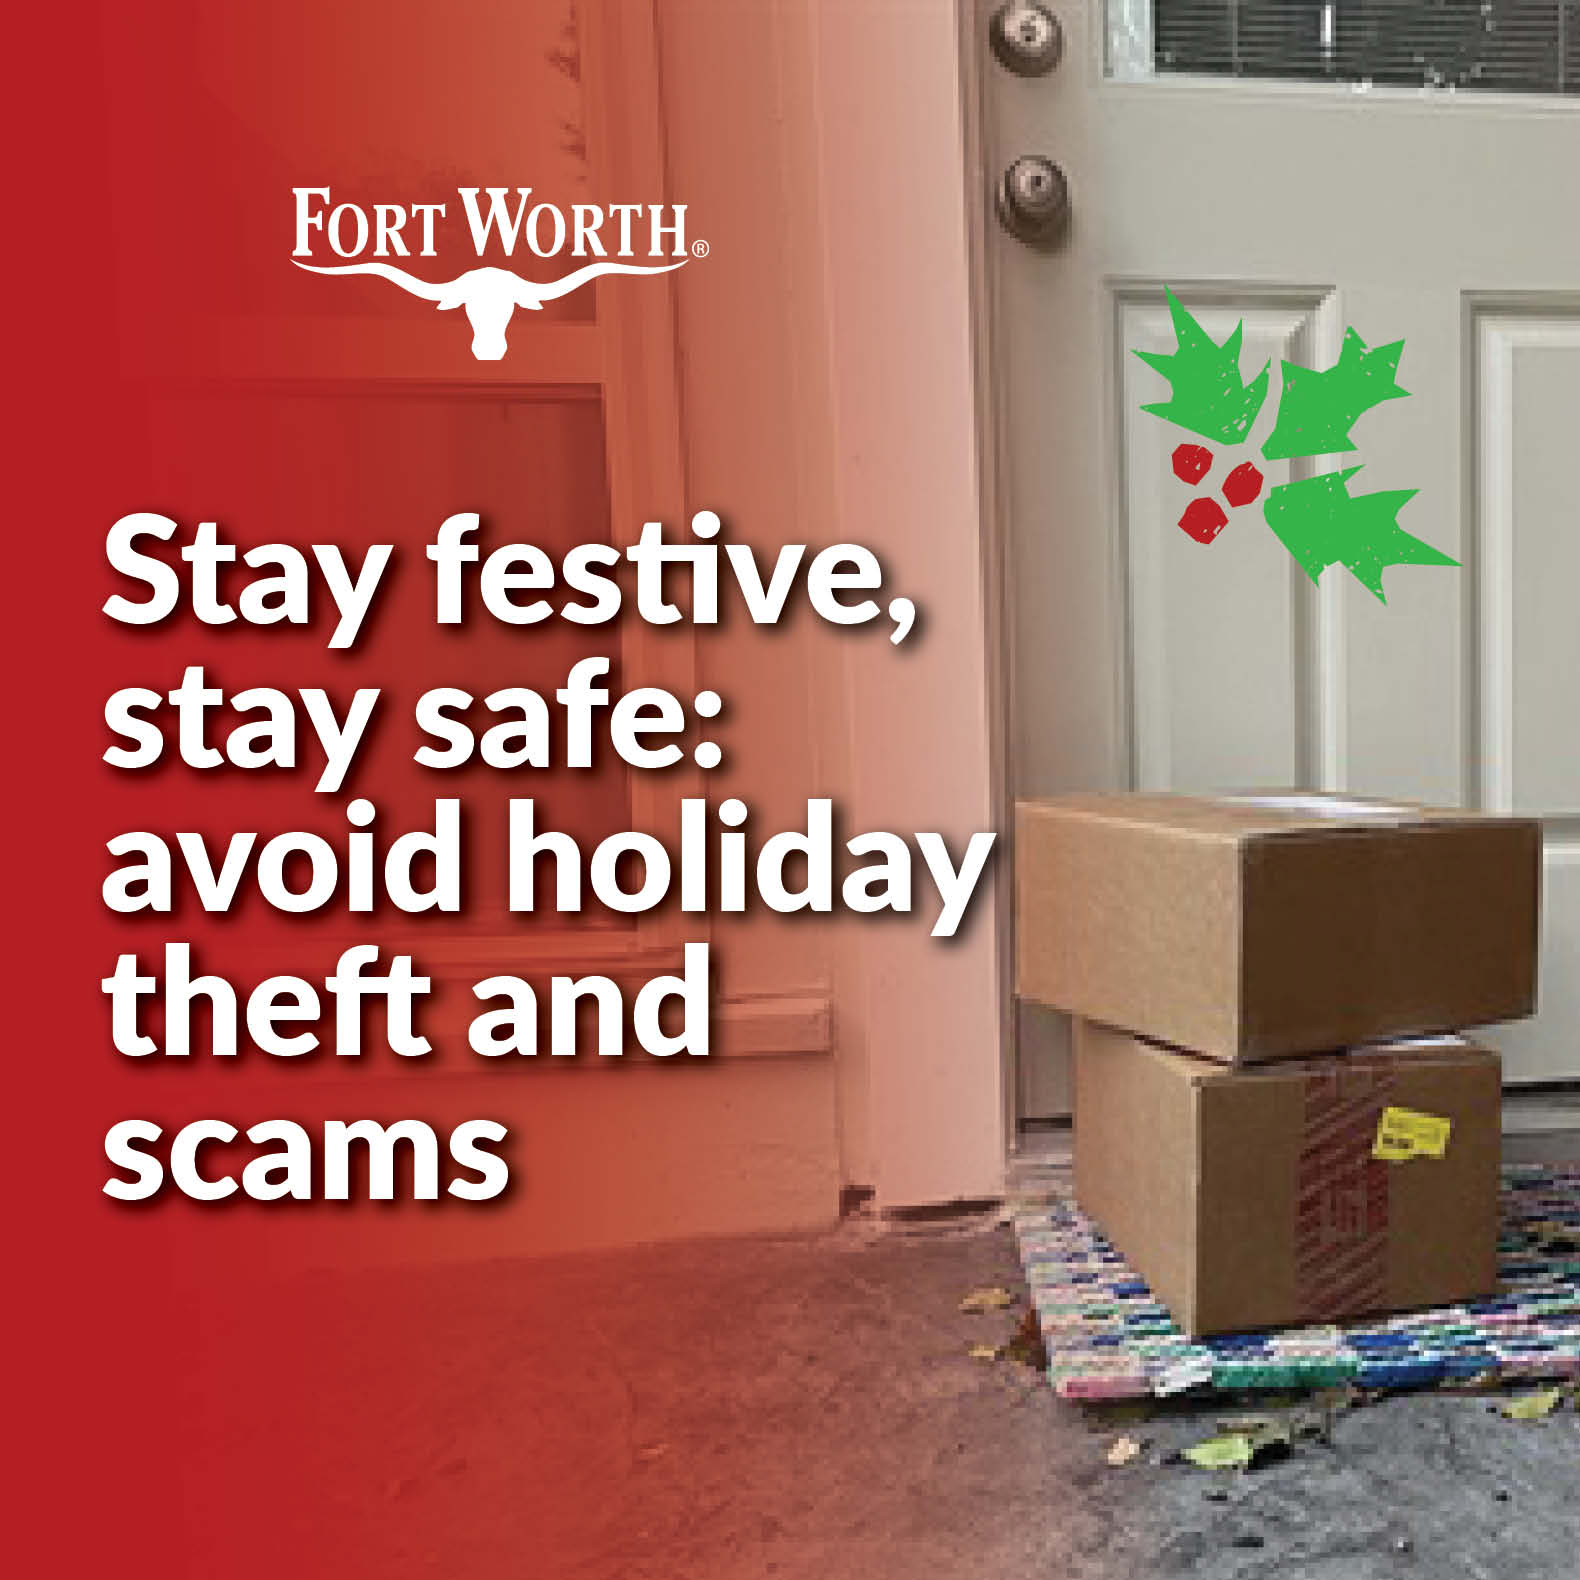 Stay Festive, stay safe: avoid holiday thest and scam